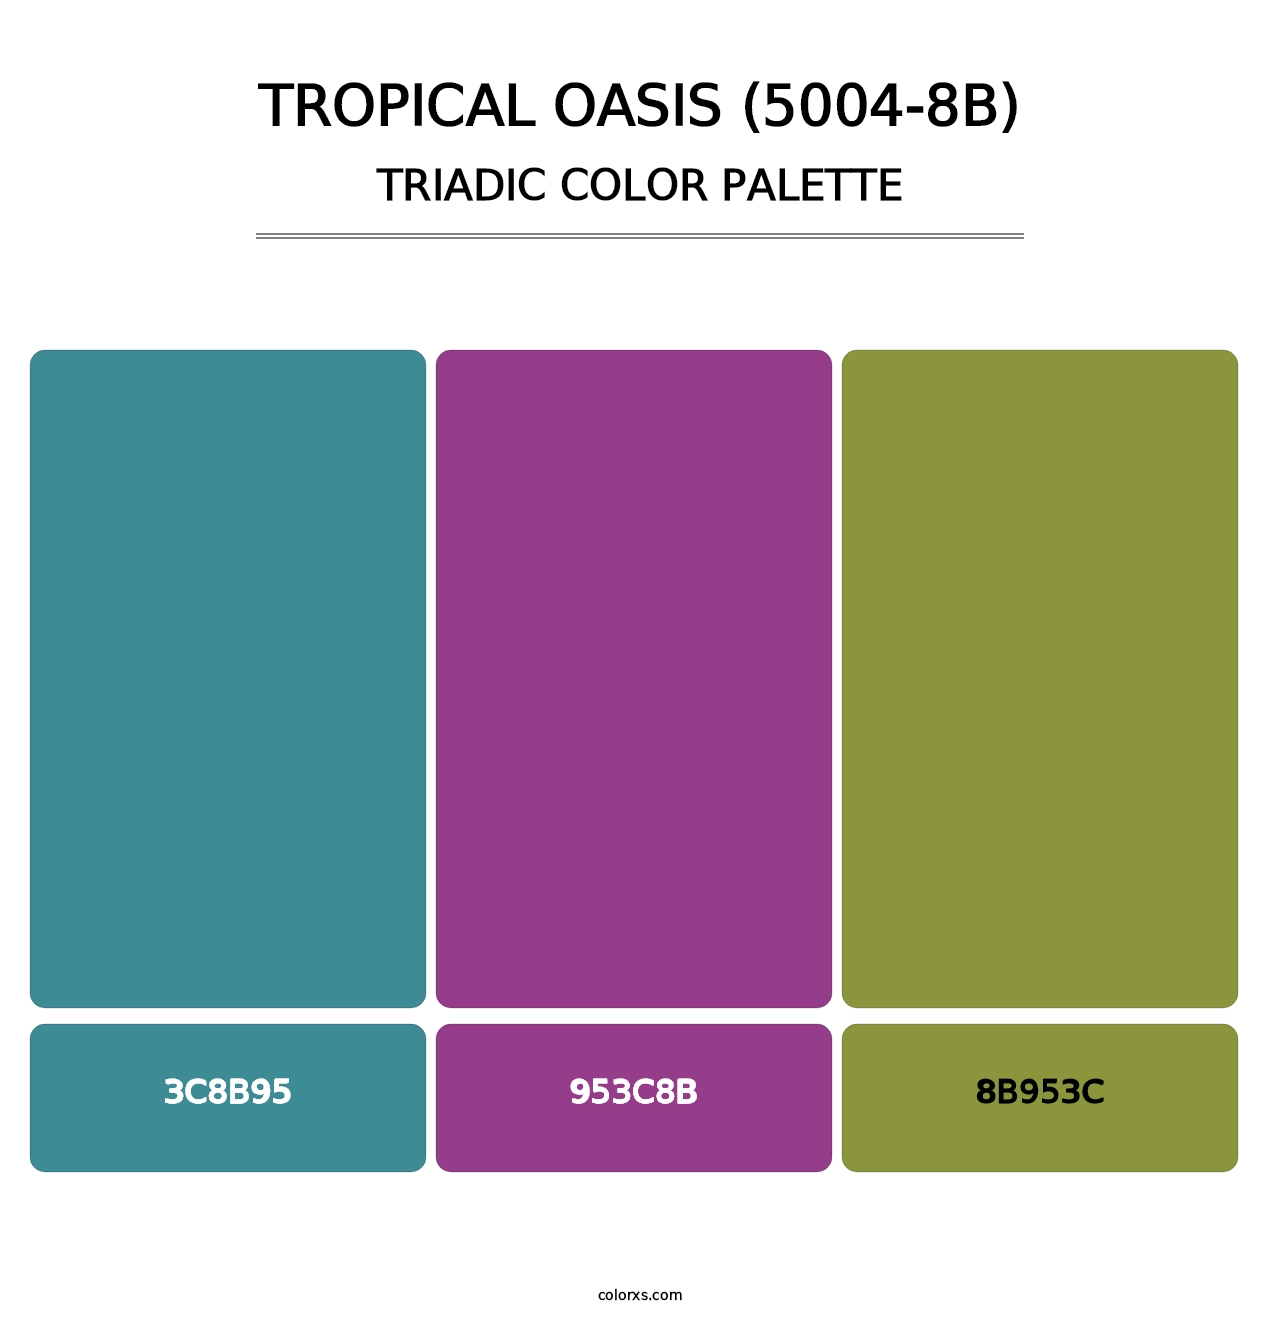 Tropical Oasis (5004-8B) - Triadic Color Palette